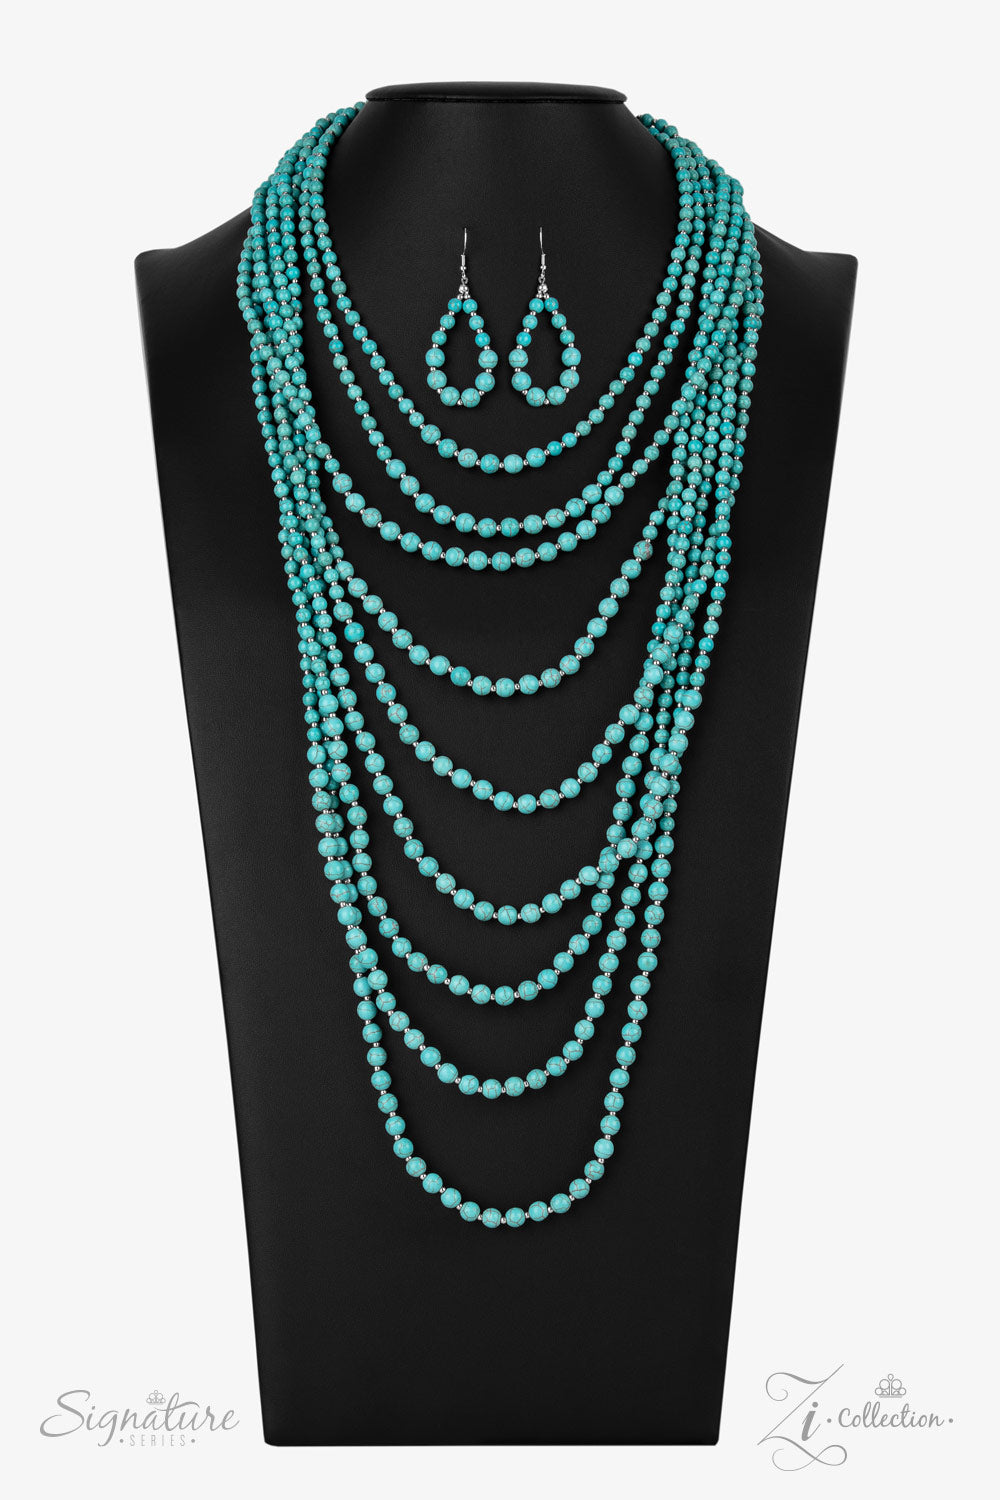 The Hilary - Zi Collection - Paparazzi necklace